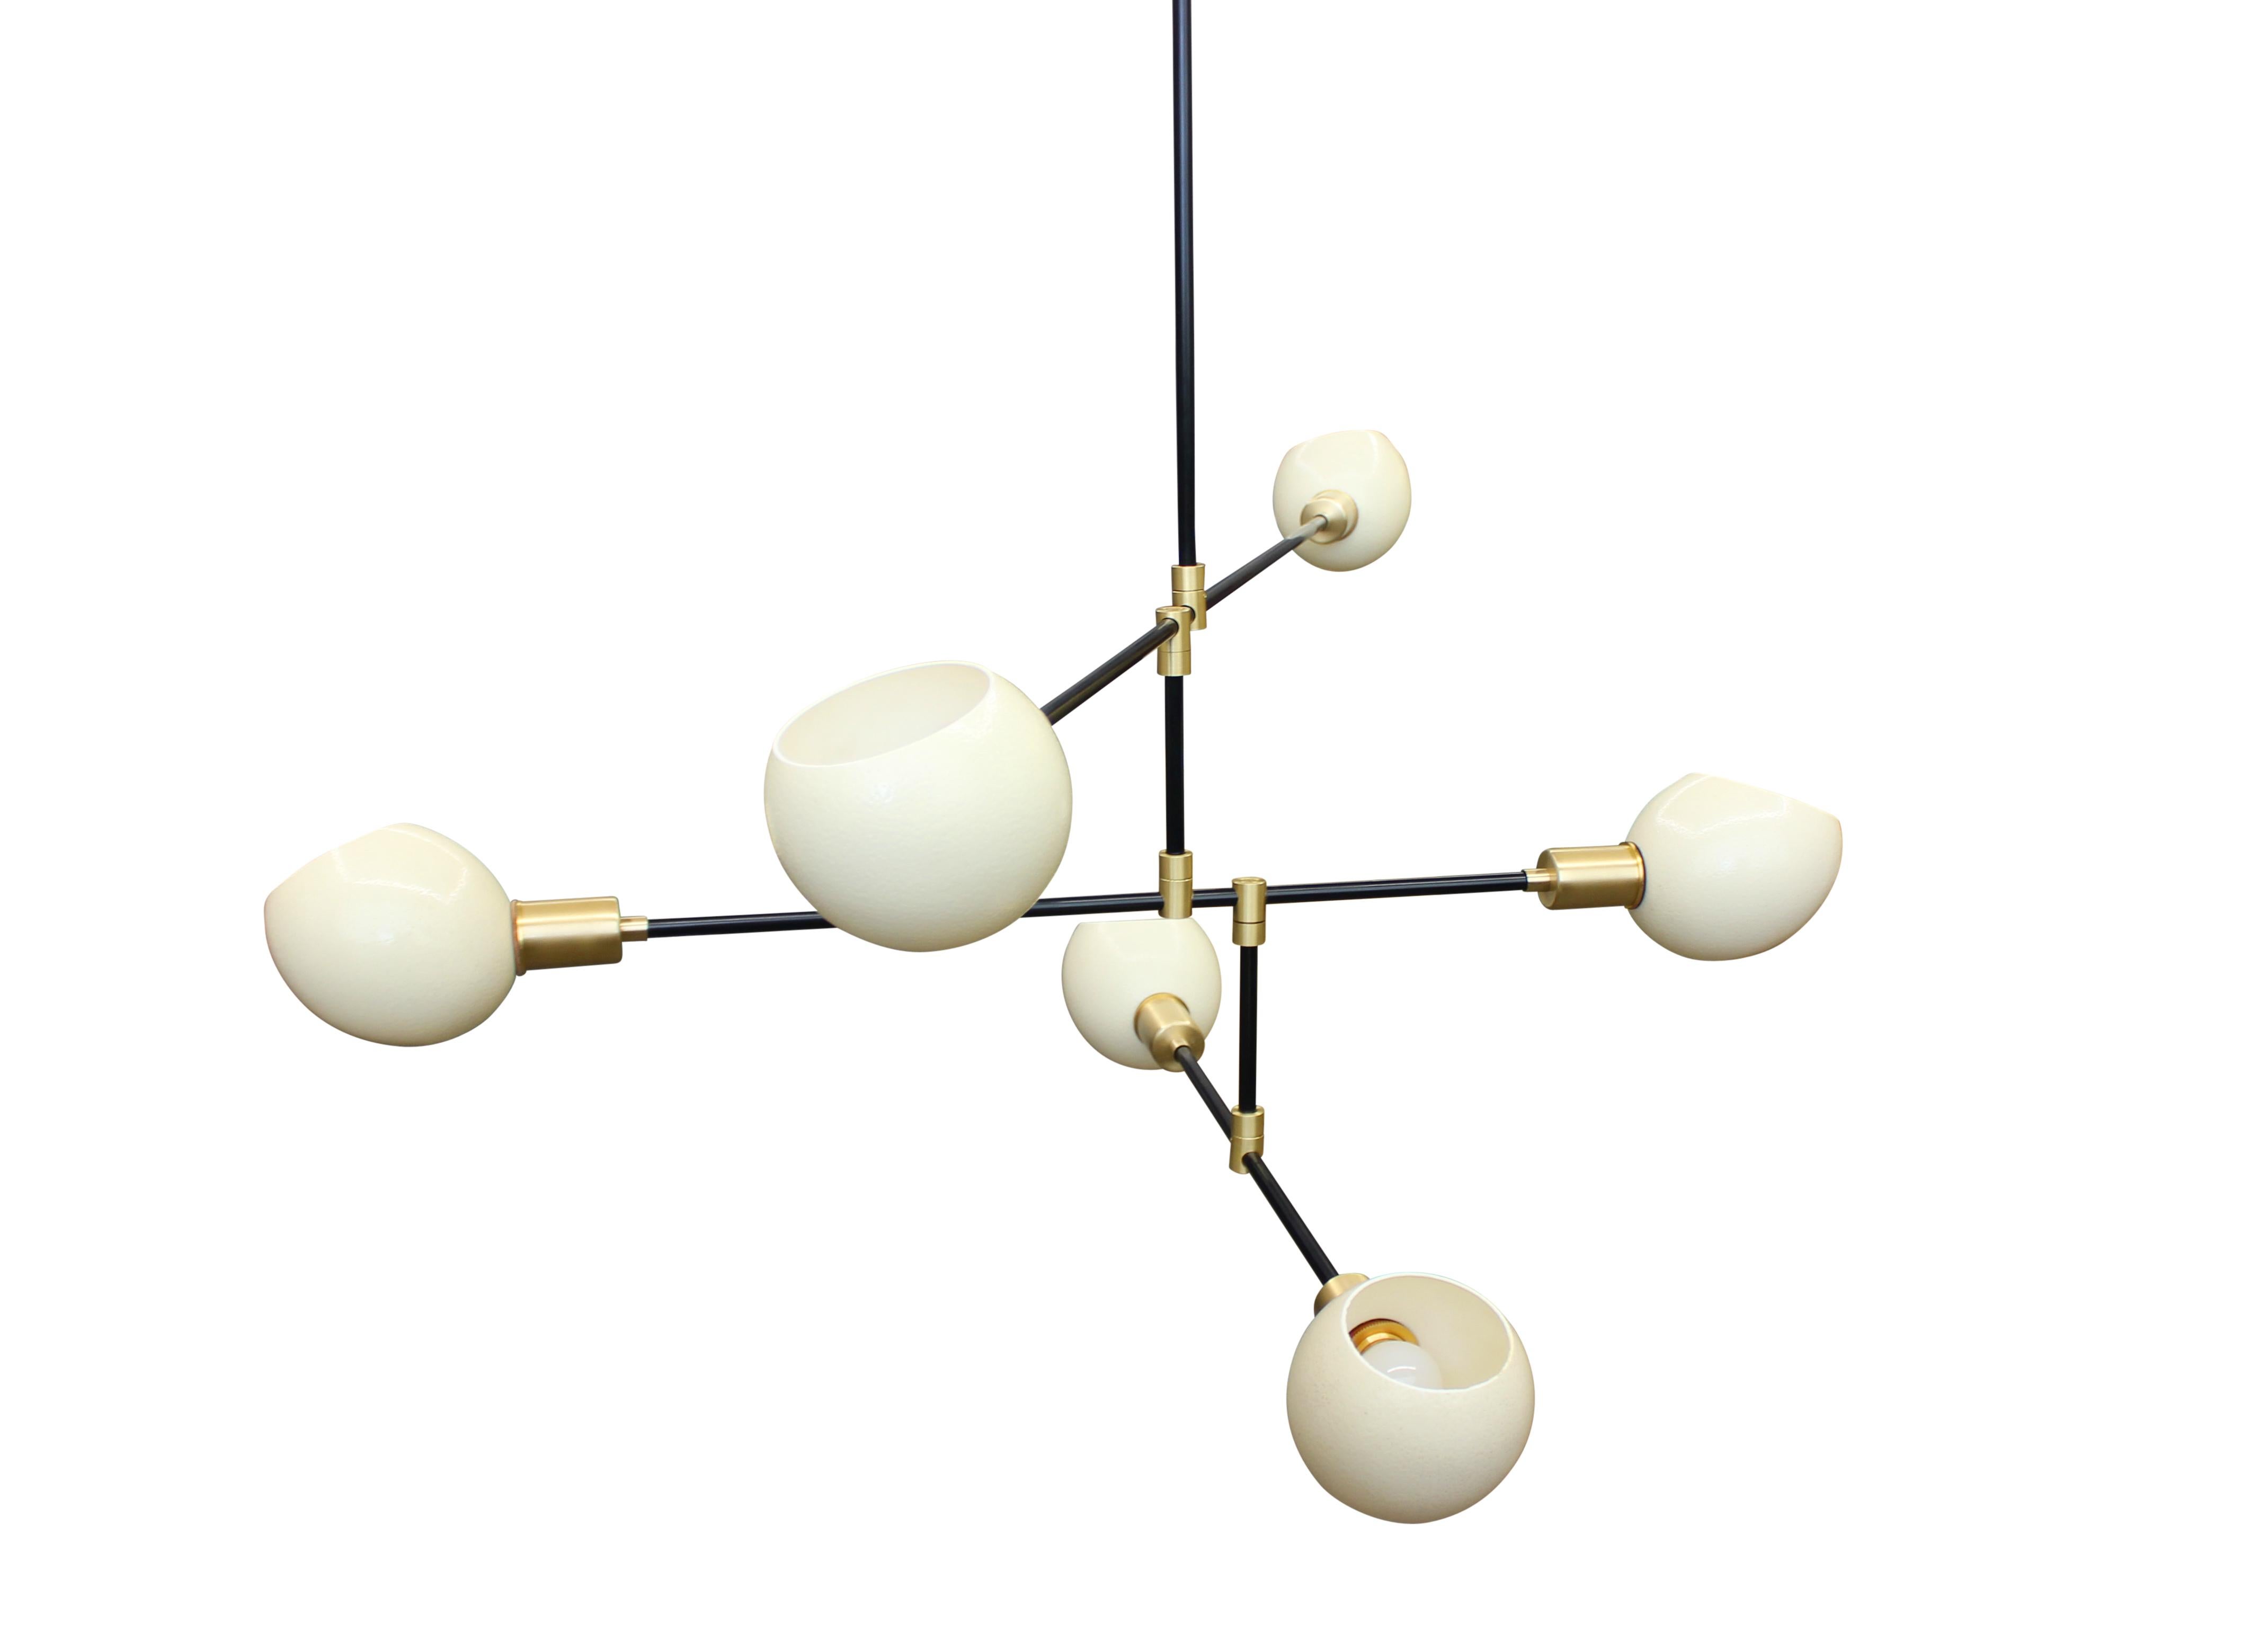 Six armed chandelier in blackened steel with brass fittings, featuring six bias cut natural ostrich egg diffusers. Adjustable arms can be arrayed at various angles. Can also be made as an eight or ten arm fixture.